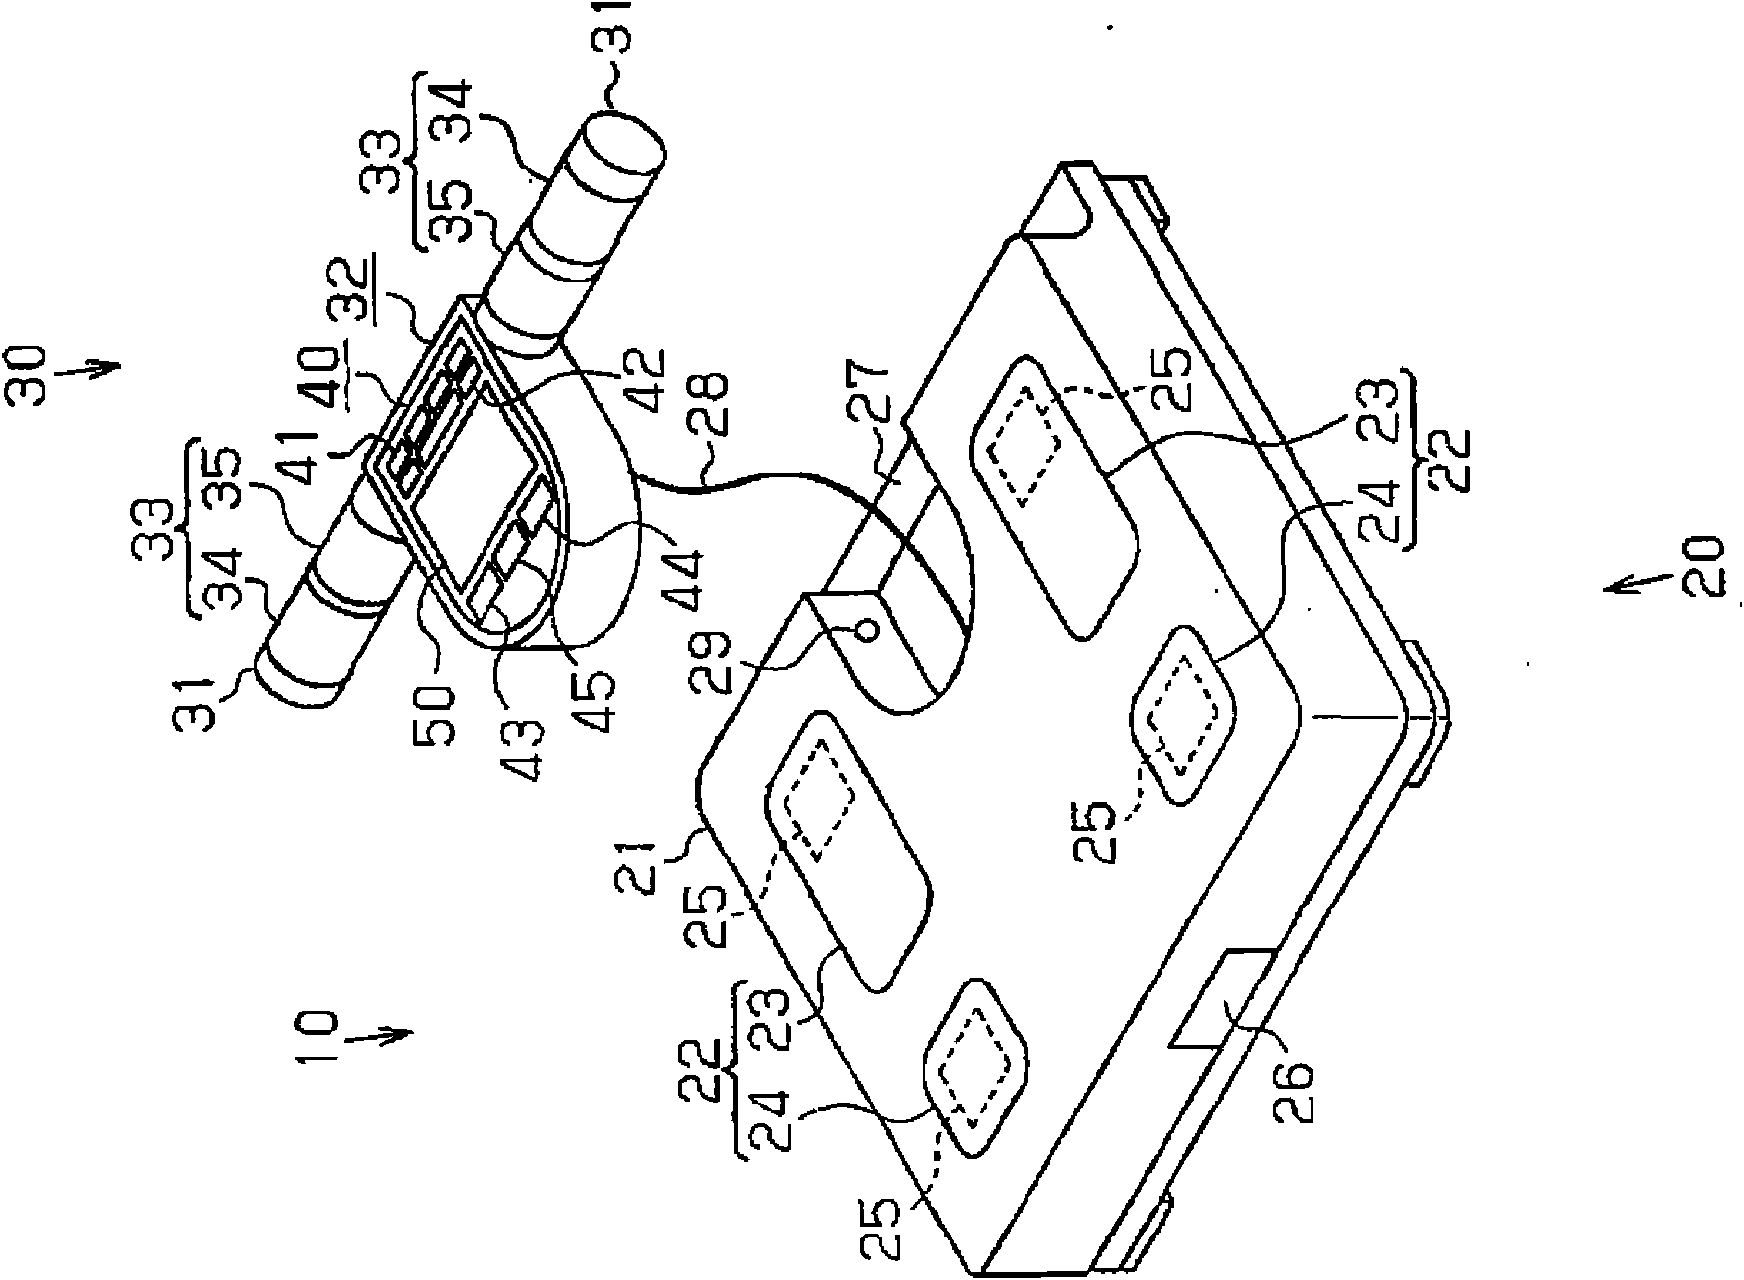 Information measuring device for organism